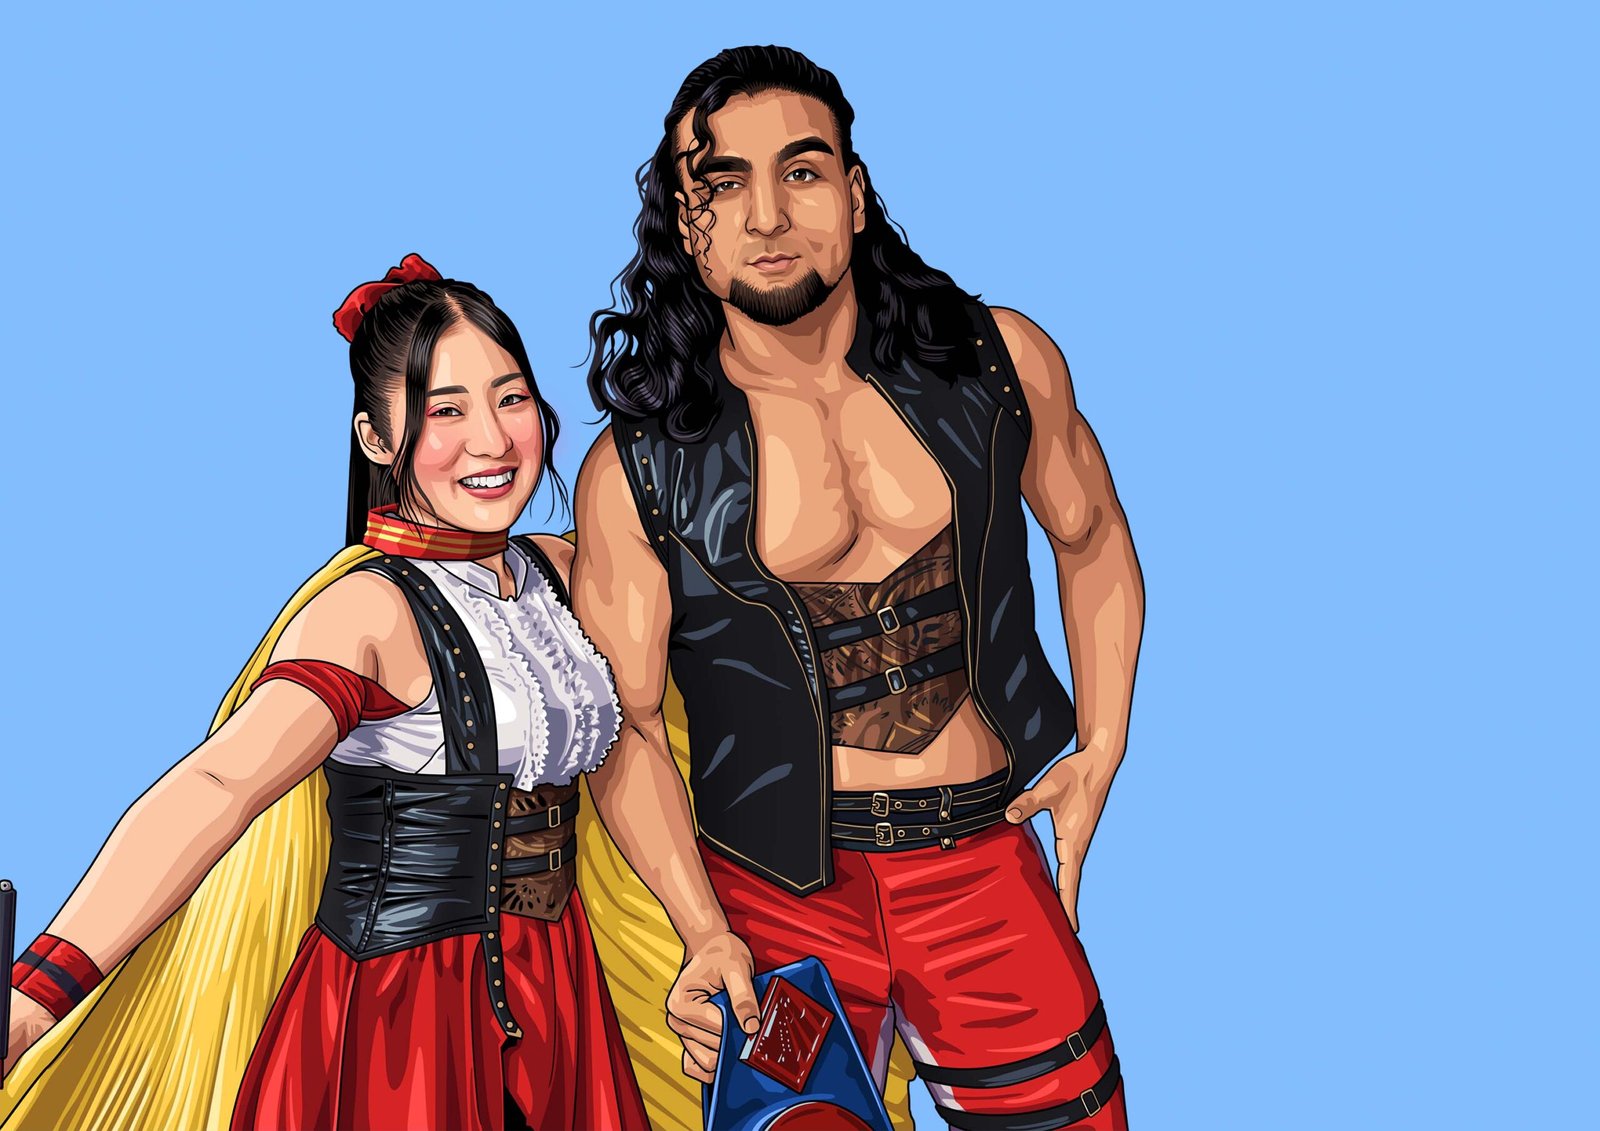 Q&A with Mei Suruga and Baliyan Akki, on tag-team wrestling and